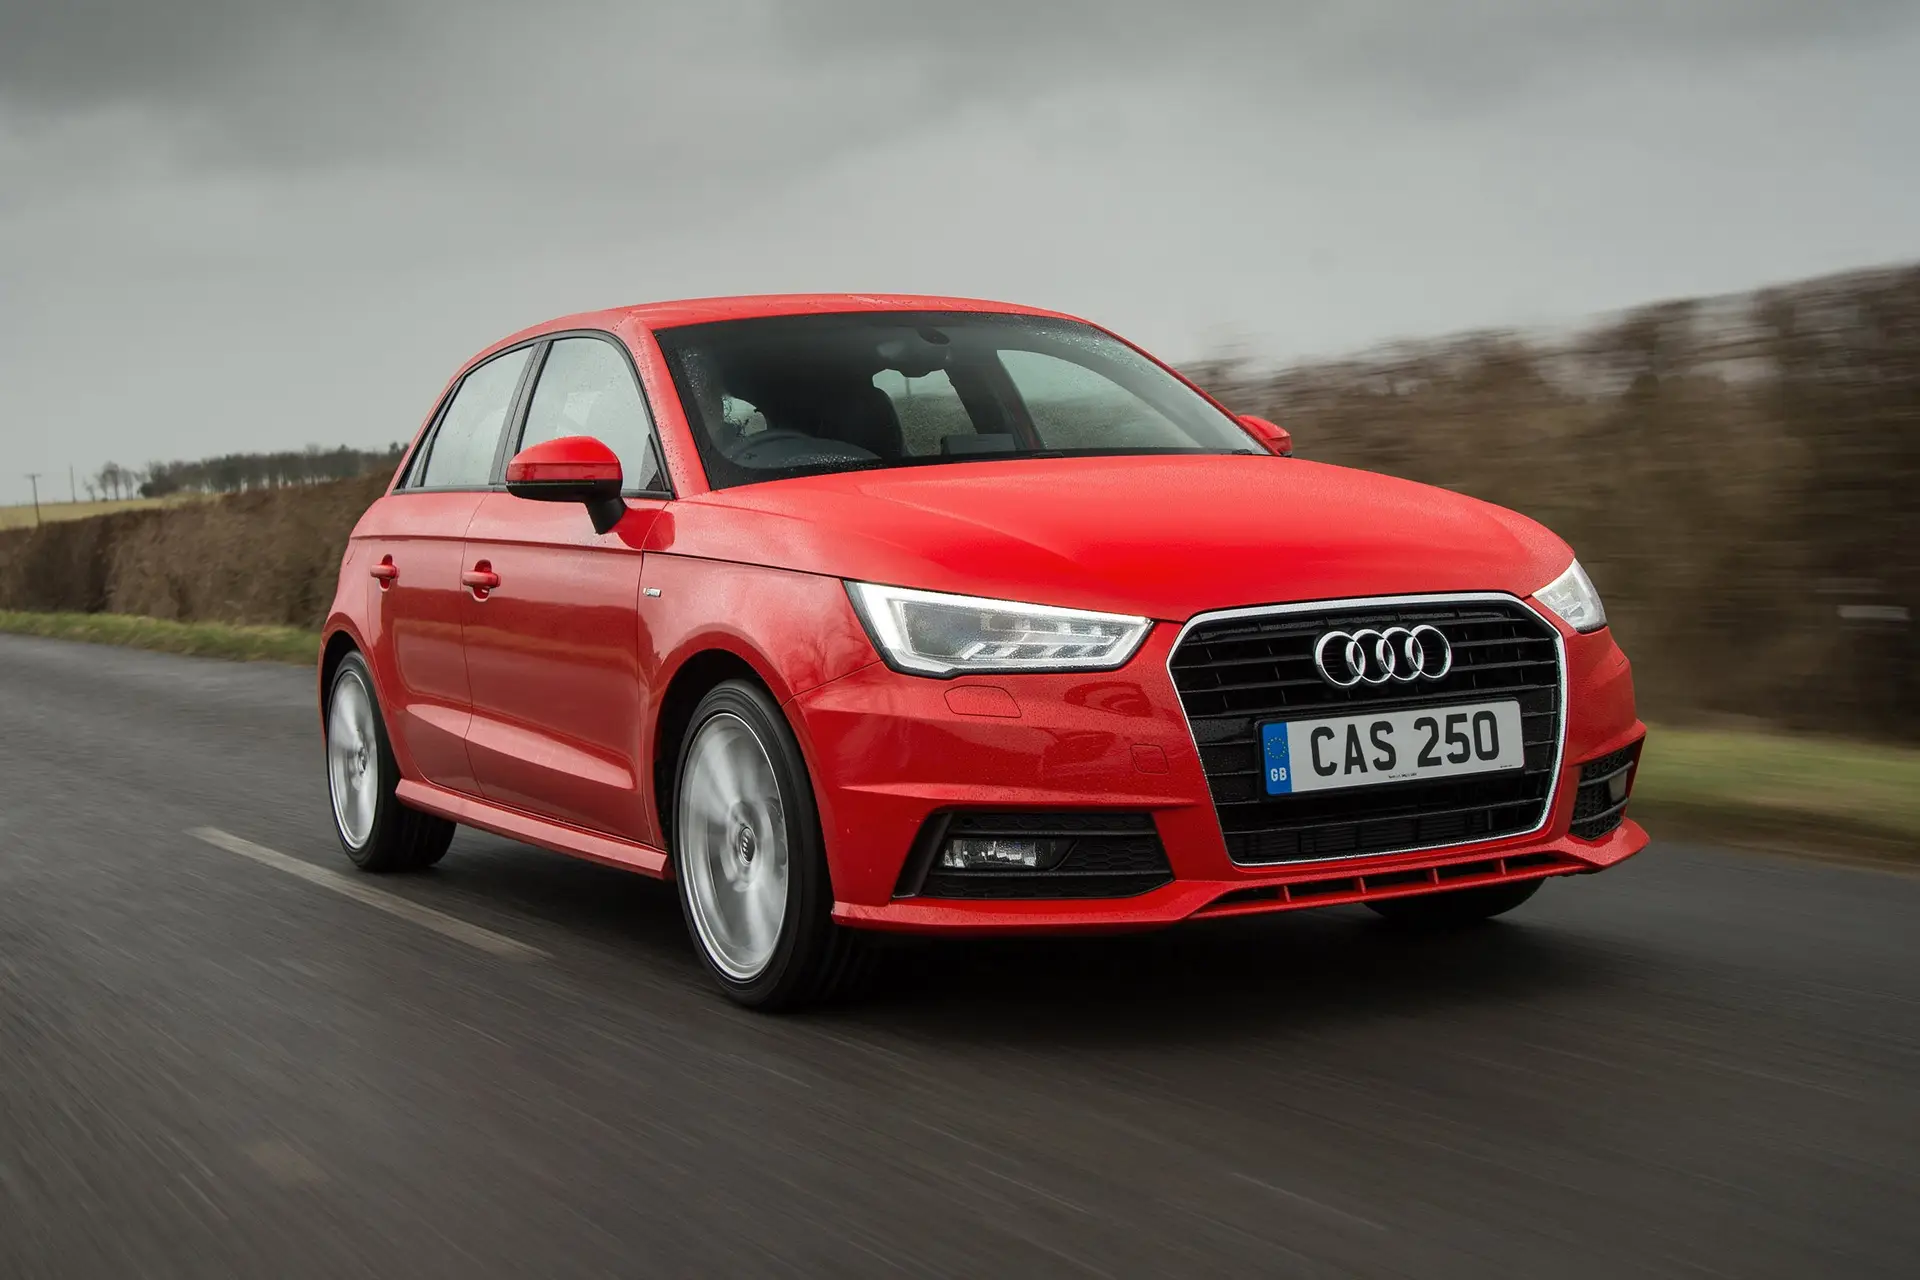 Used Audi A1 Sportback (2012 – 2018) Review: Driving Front